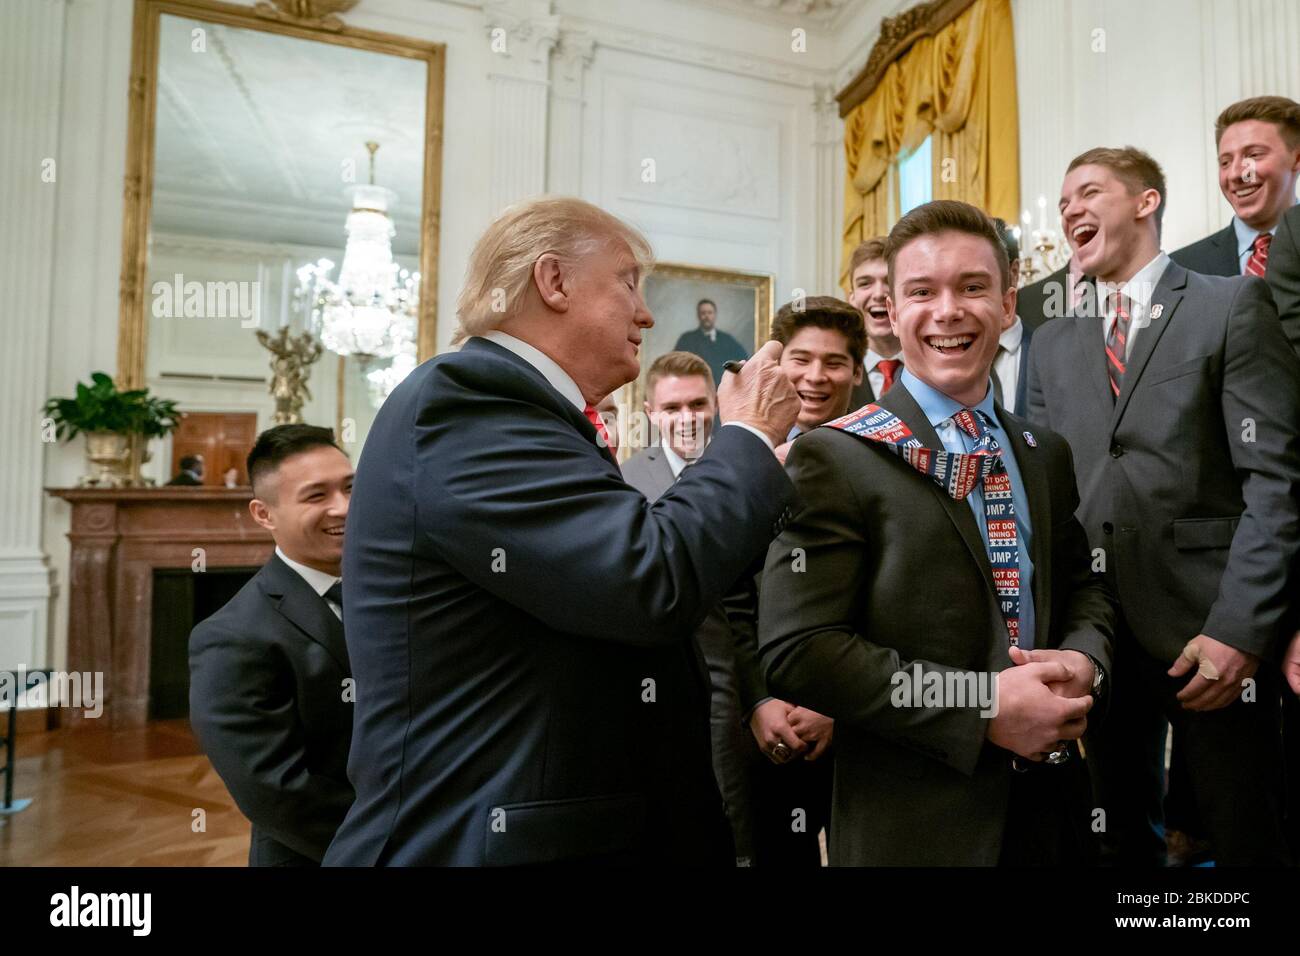 President Donald J. Trump signs the tie of one of the members of the 2019 NCAA Stanford University Men’s Champion Gymnastics team Friday, Nov. 22, 2019, during the NCAA Collegiate National Champions Day in the Blue Room of the White House. President Trump Greets NCAA National Champions Stock Photo